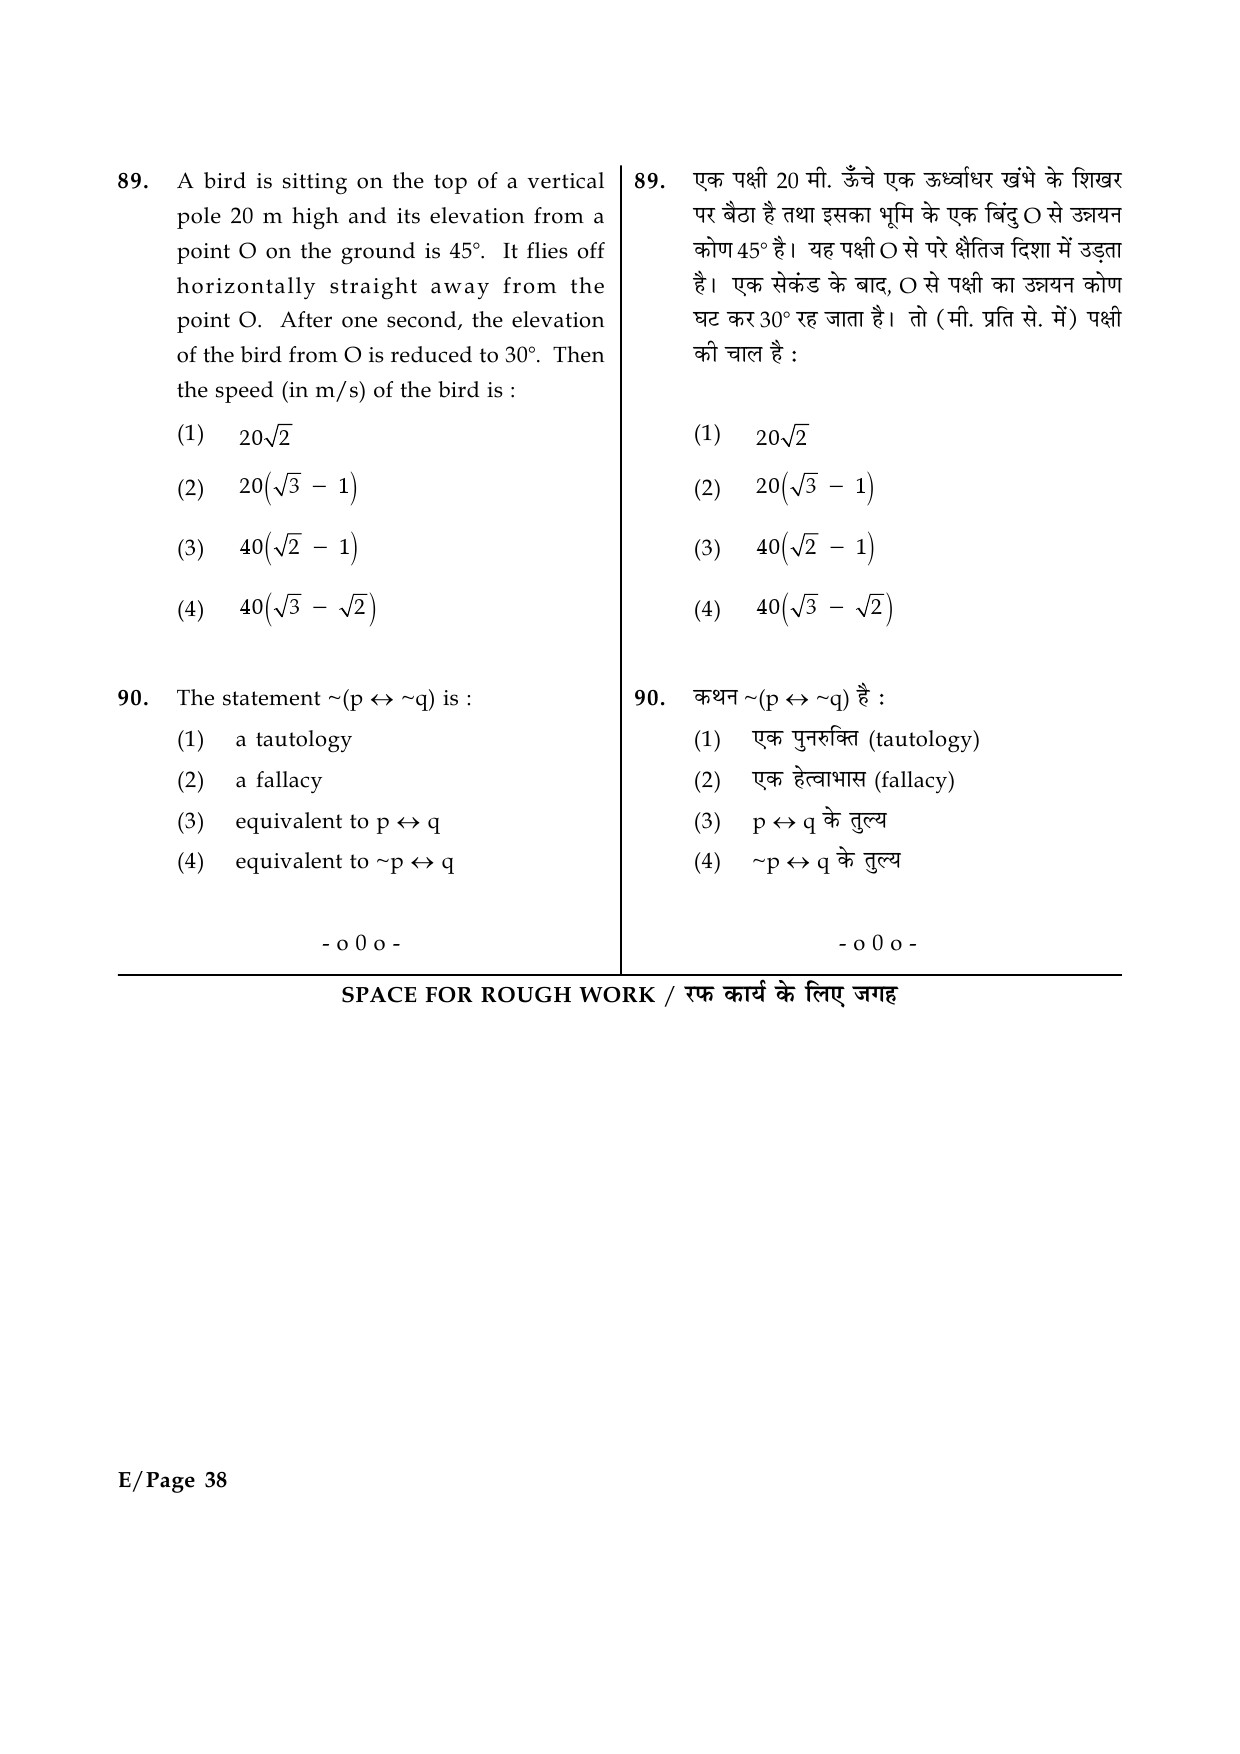 JEE Main Exam Question Paper 2014 Booklet E 38